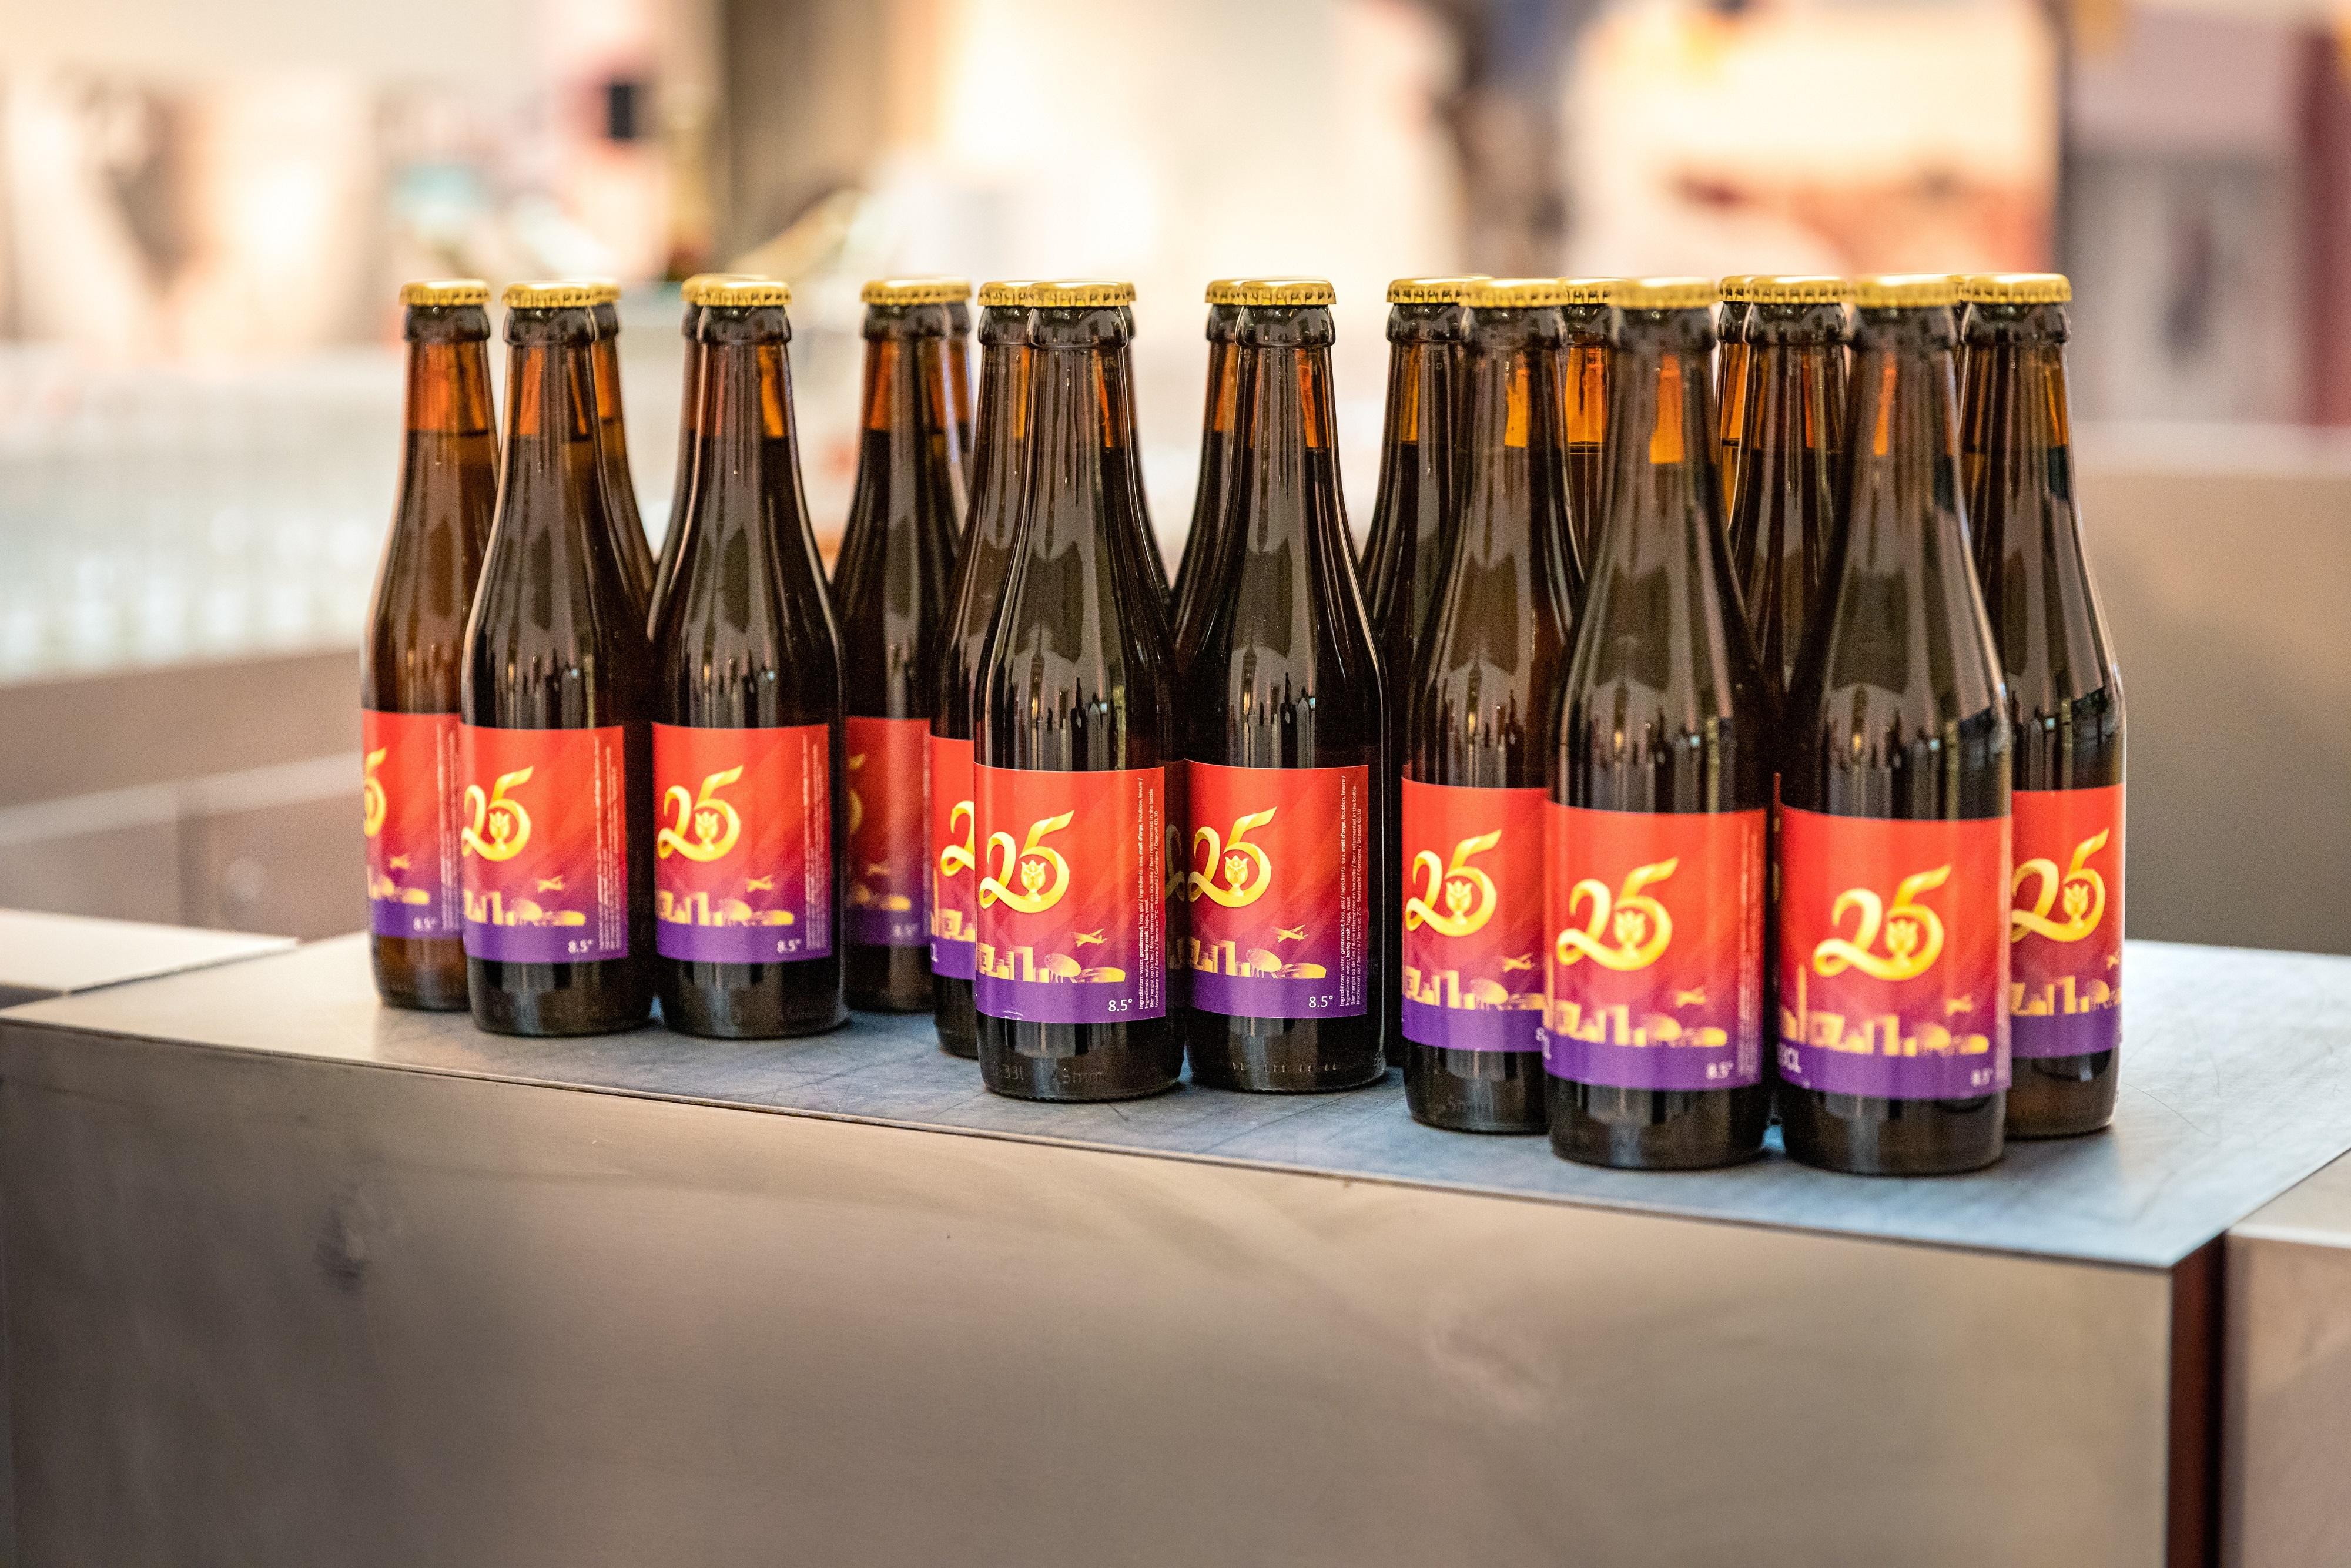 The Hong Kong Economic and Trade Office in Brussels had a Belgian limited edition beer brewed and bottled to mark the 25th anniversary of the establishment of the Hong Kong Special Administrative Region (HKSAR). Special beer gift sets were given to guests attending the HKSAR 25th anniversary gala event in Brussels, Belgium, on June 30 (Brussels time).